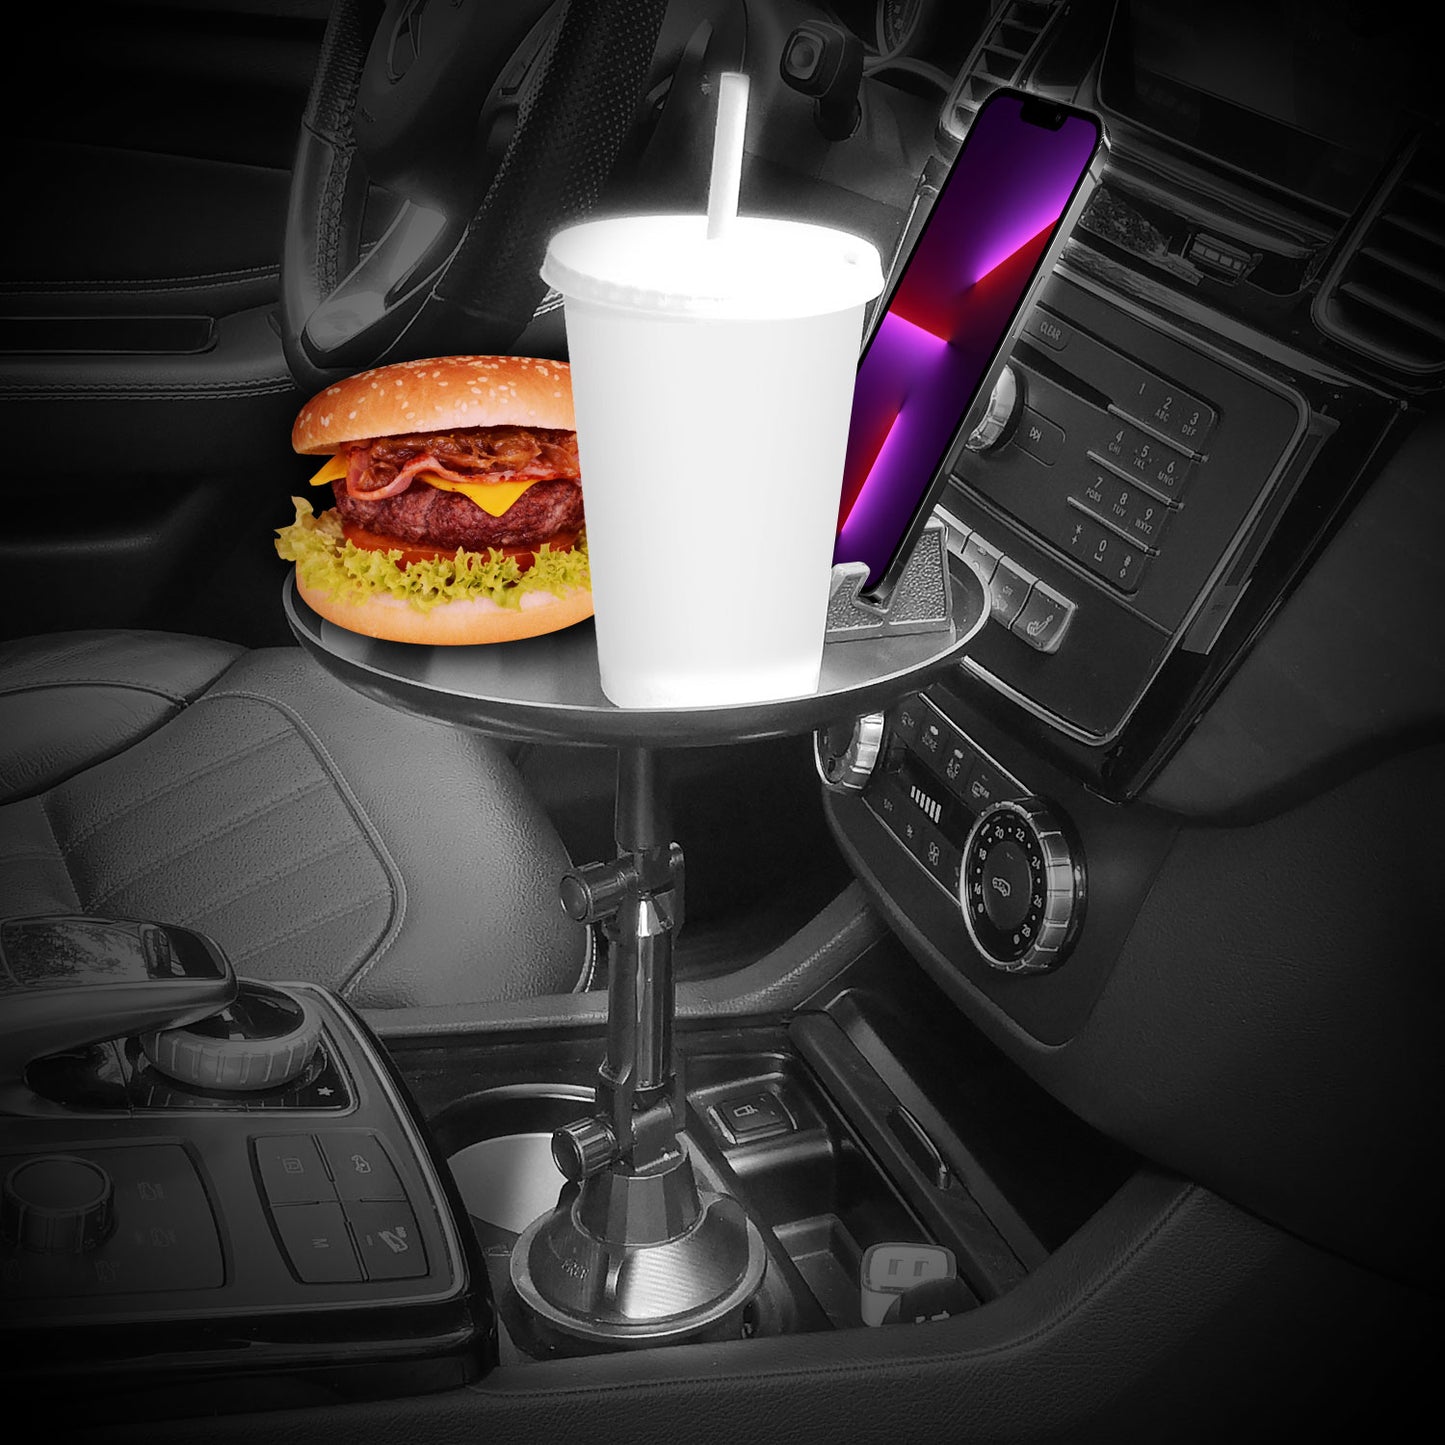 PHSK119 - Food Tray for Car Cup Holder with Phone Mount, 360 Degree Rotation and Non-Slip Matt for Cars, Boats, Golf Carts and More